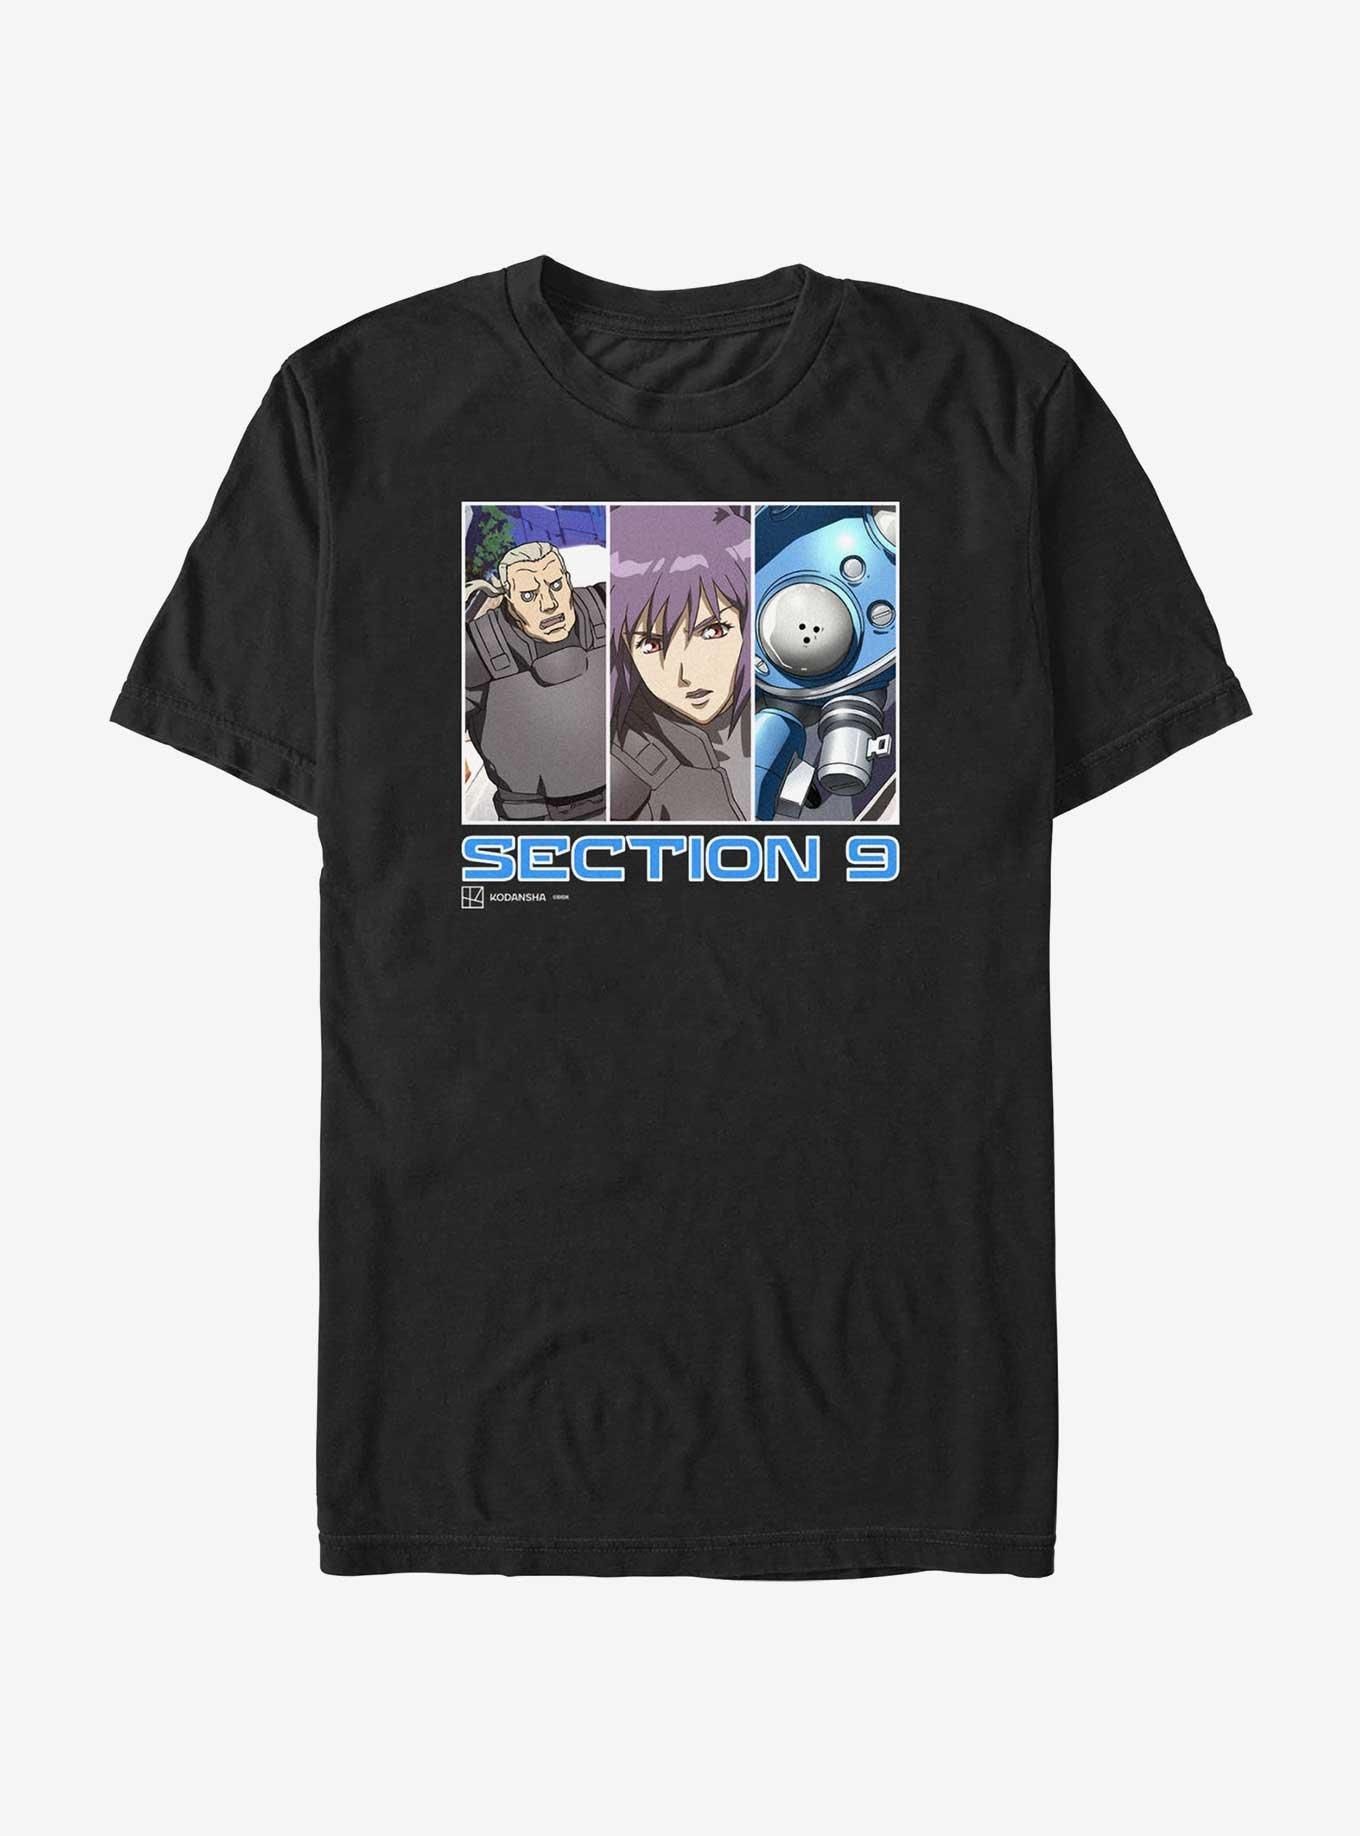 Ghost in the Shell Section 9 Team T-Shirt, BLACK, hi-res